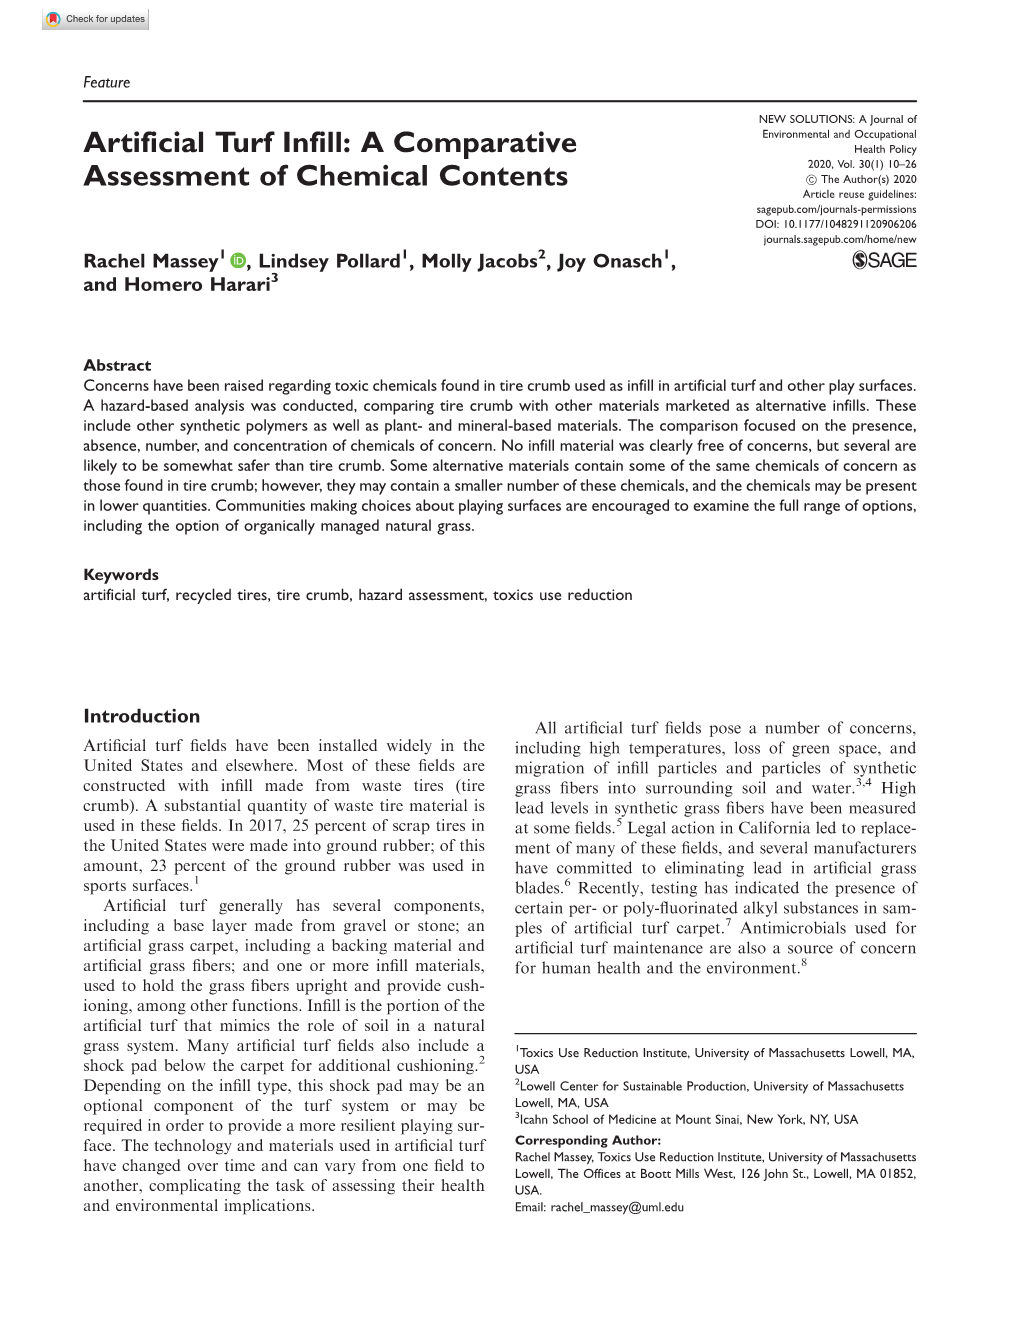 Artificial Turf Infill: a Comparative Assessment of Chemical Contents